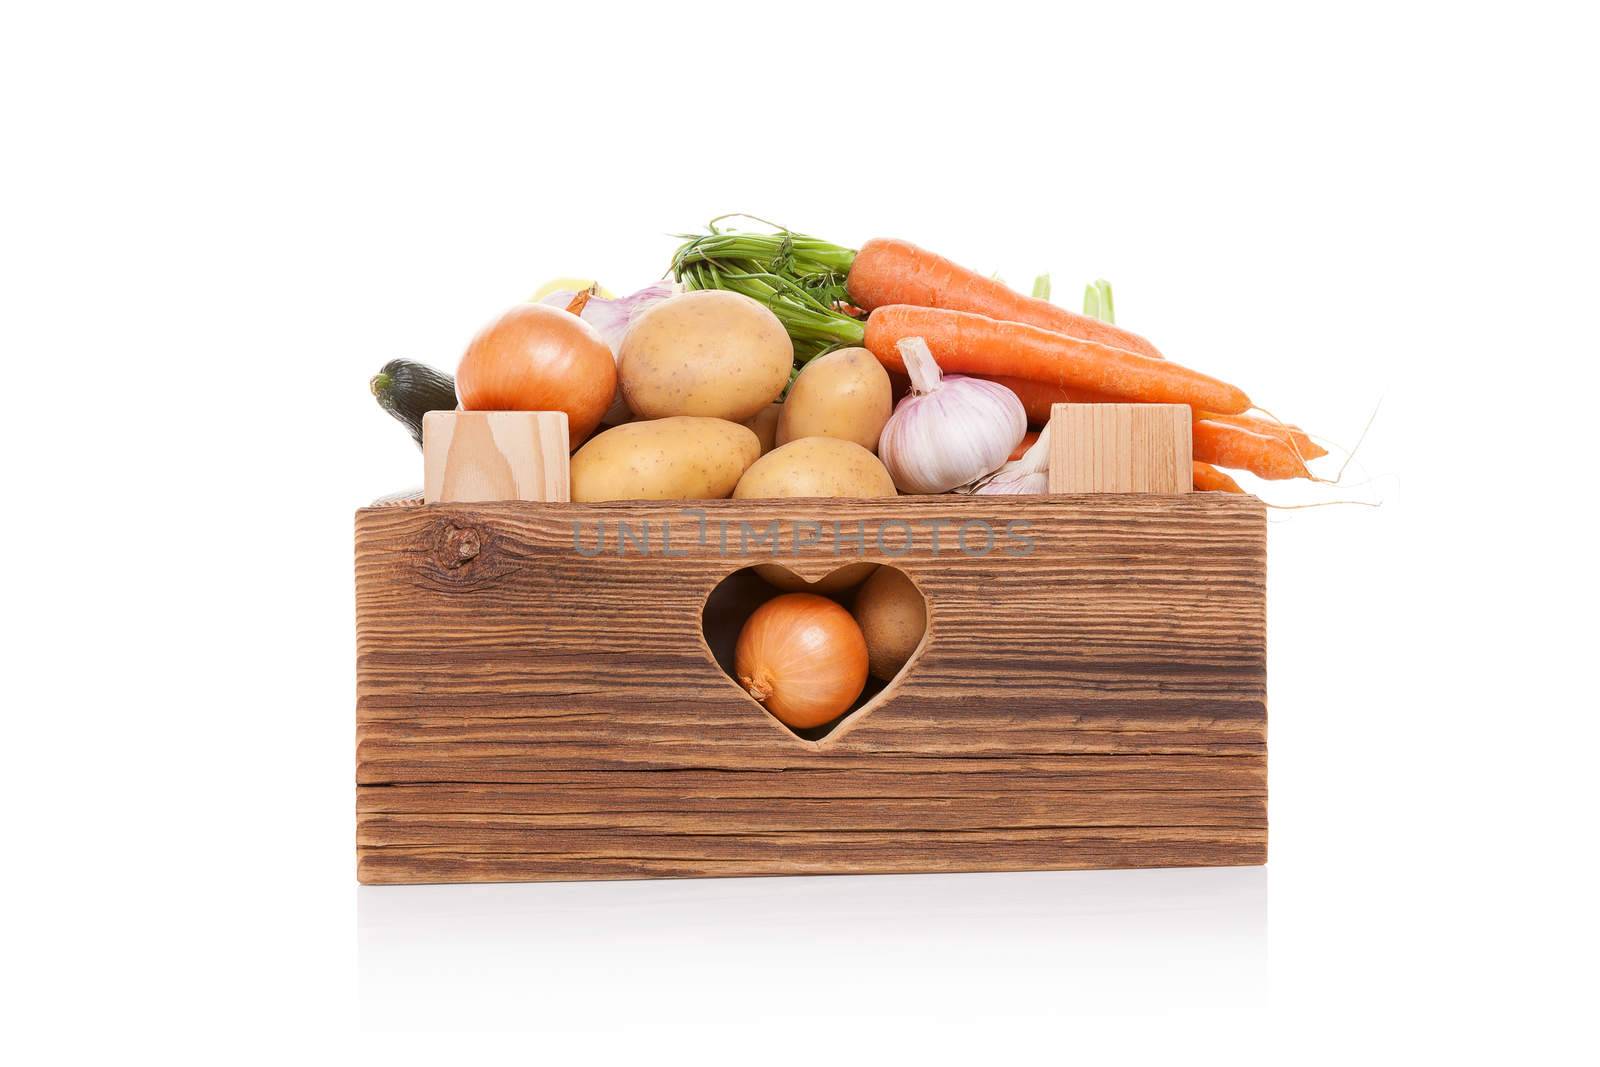 Organic seasonal vegetable in rustic wooden crate isolated on white background. Healthy vegetable eating. 